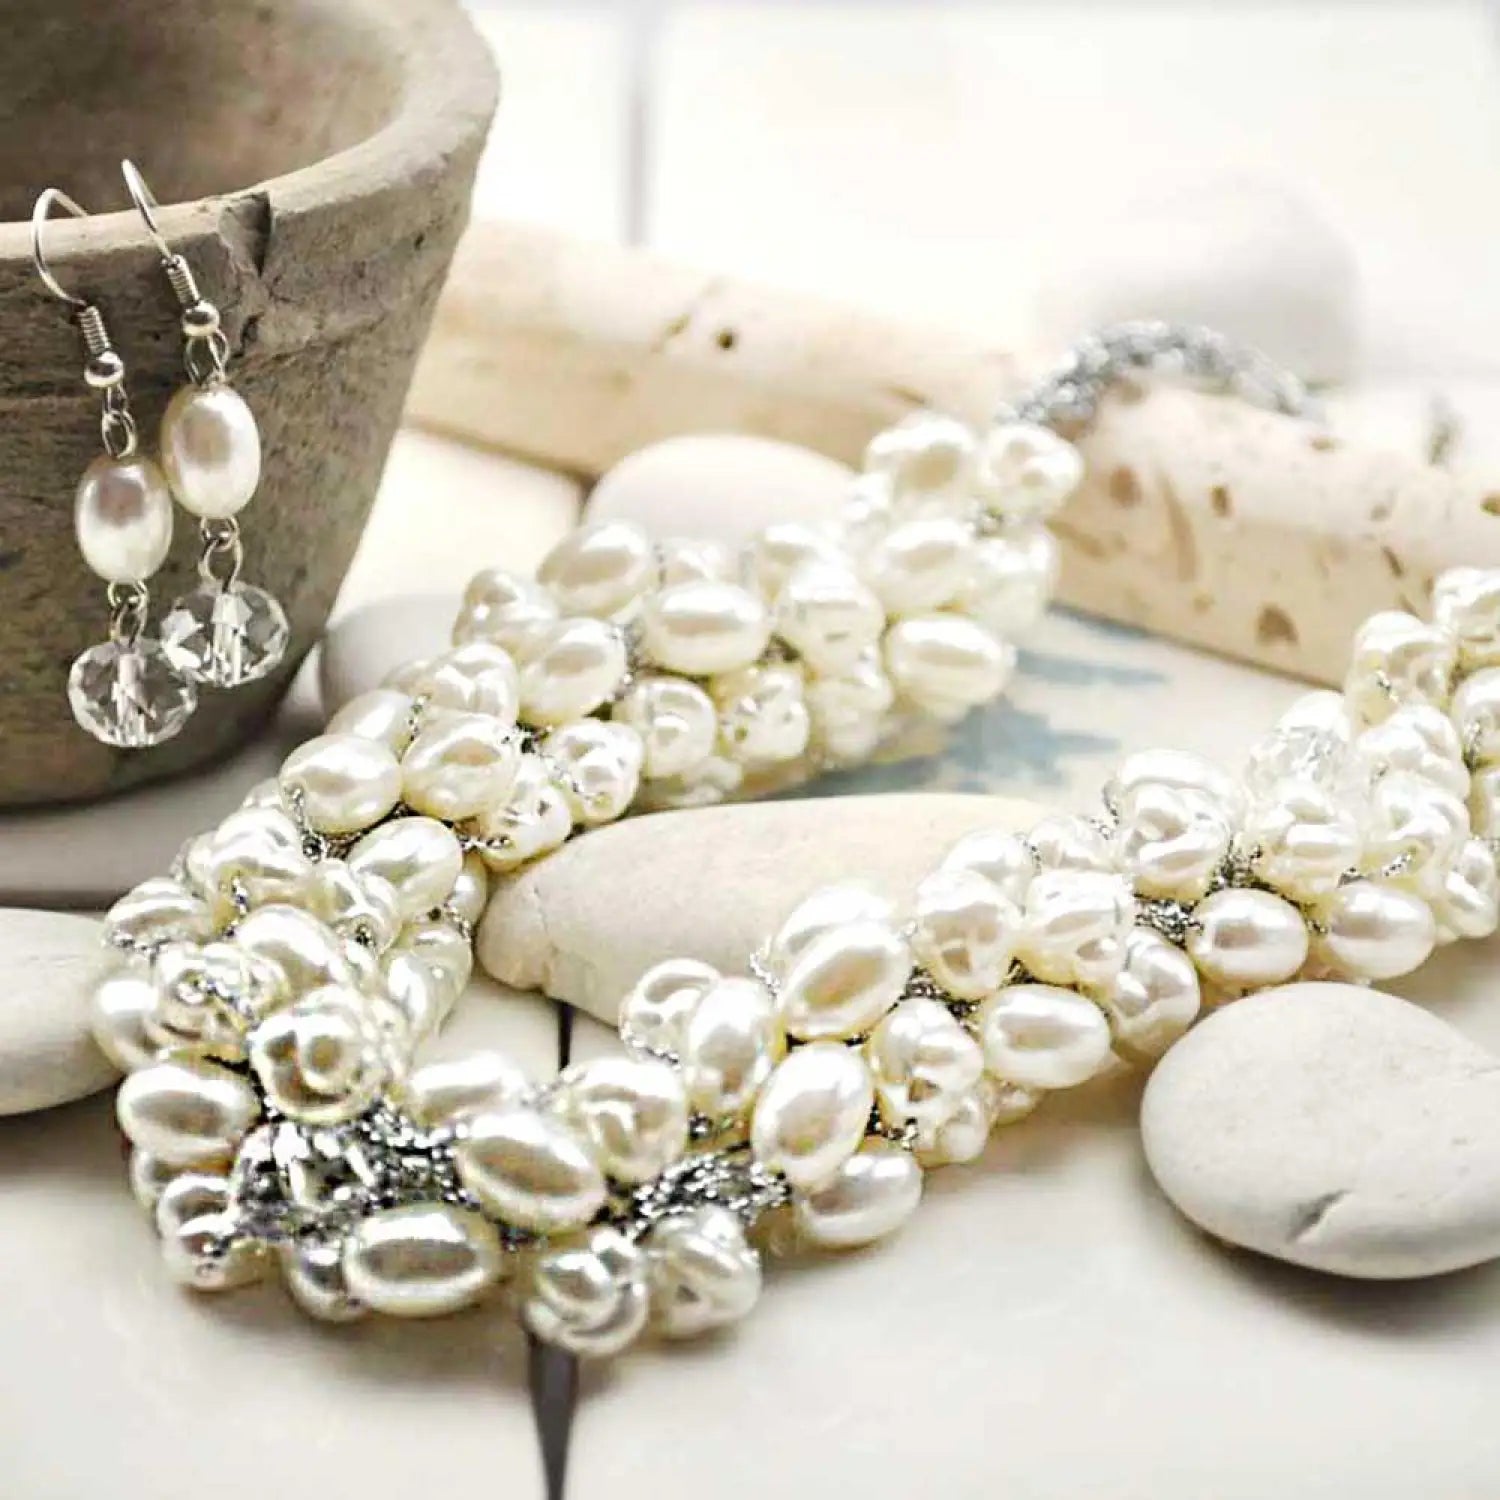 Pearl bead bracelet with crystals on white table